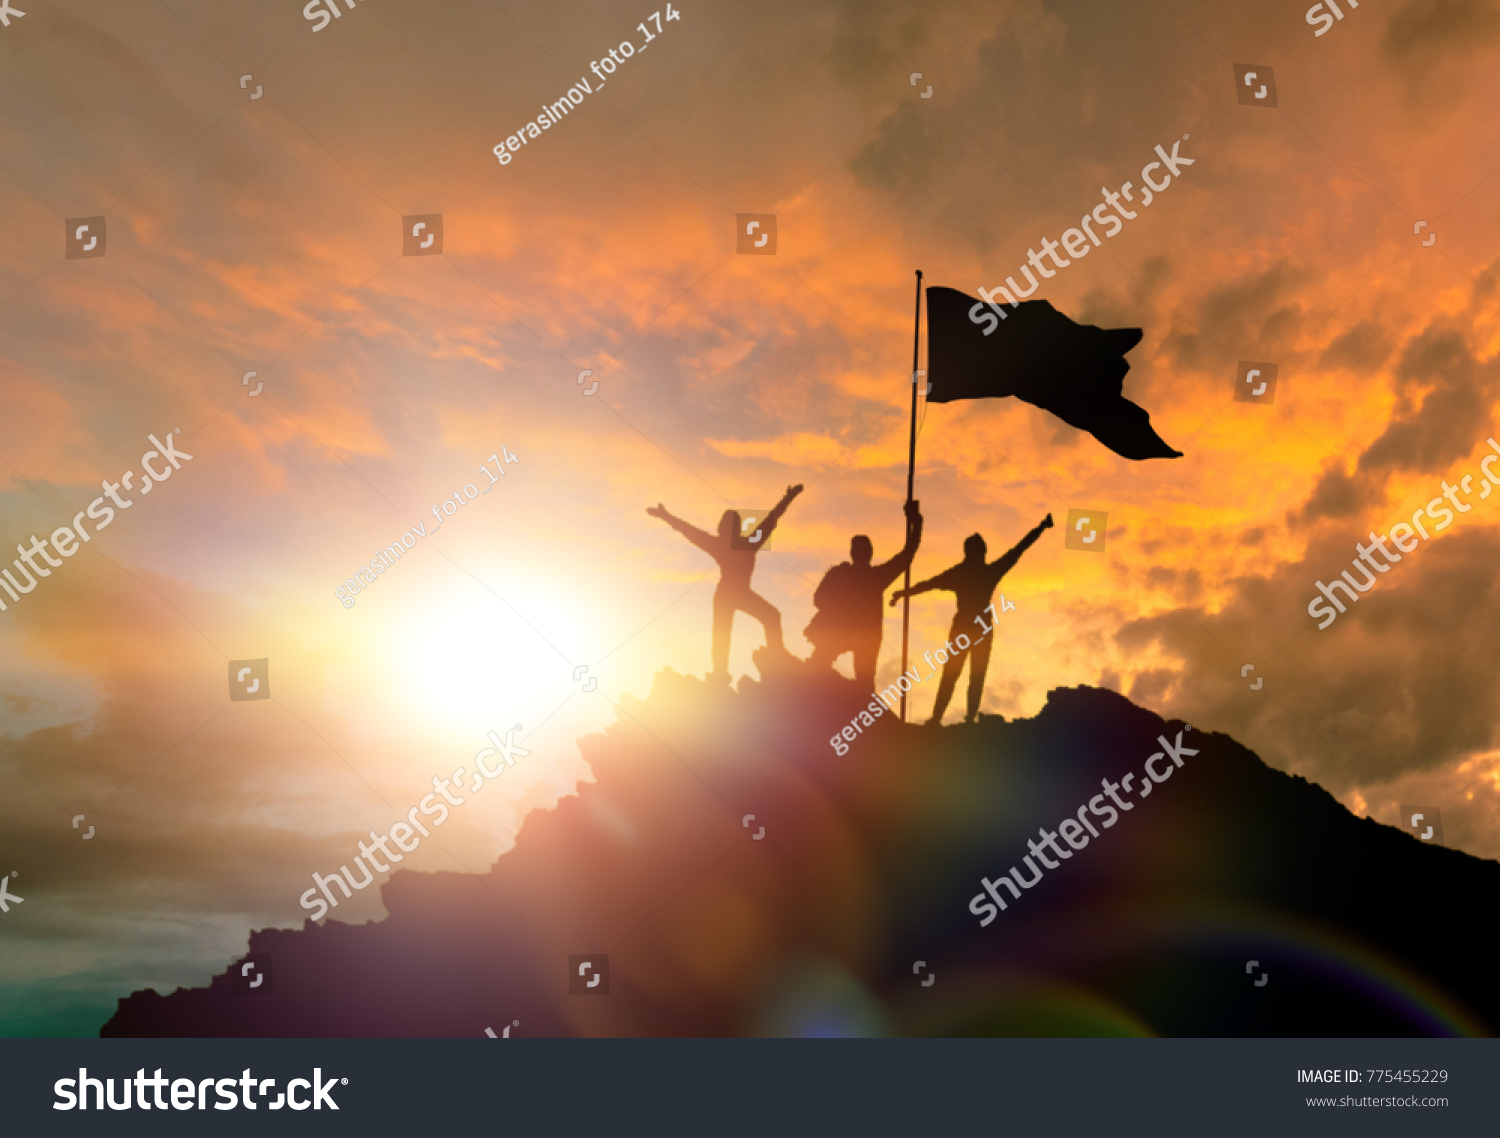 Conquest of height, silhouettes of three people, on top of a mountain, with a flag. Conceptual design. Against the background of the evening sky at sunset with clouds. #775455229